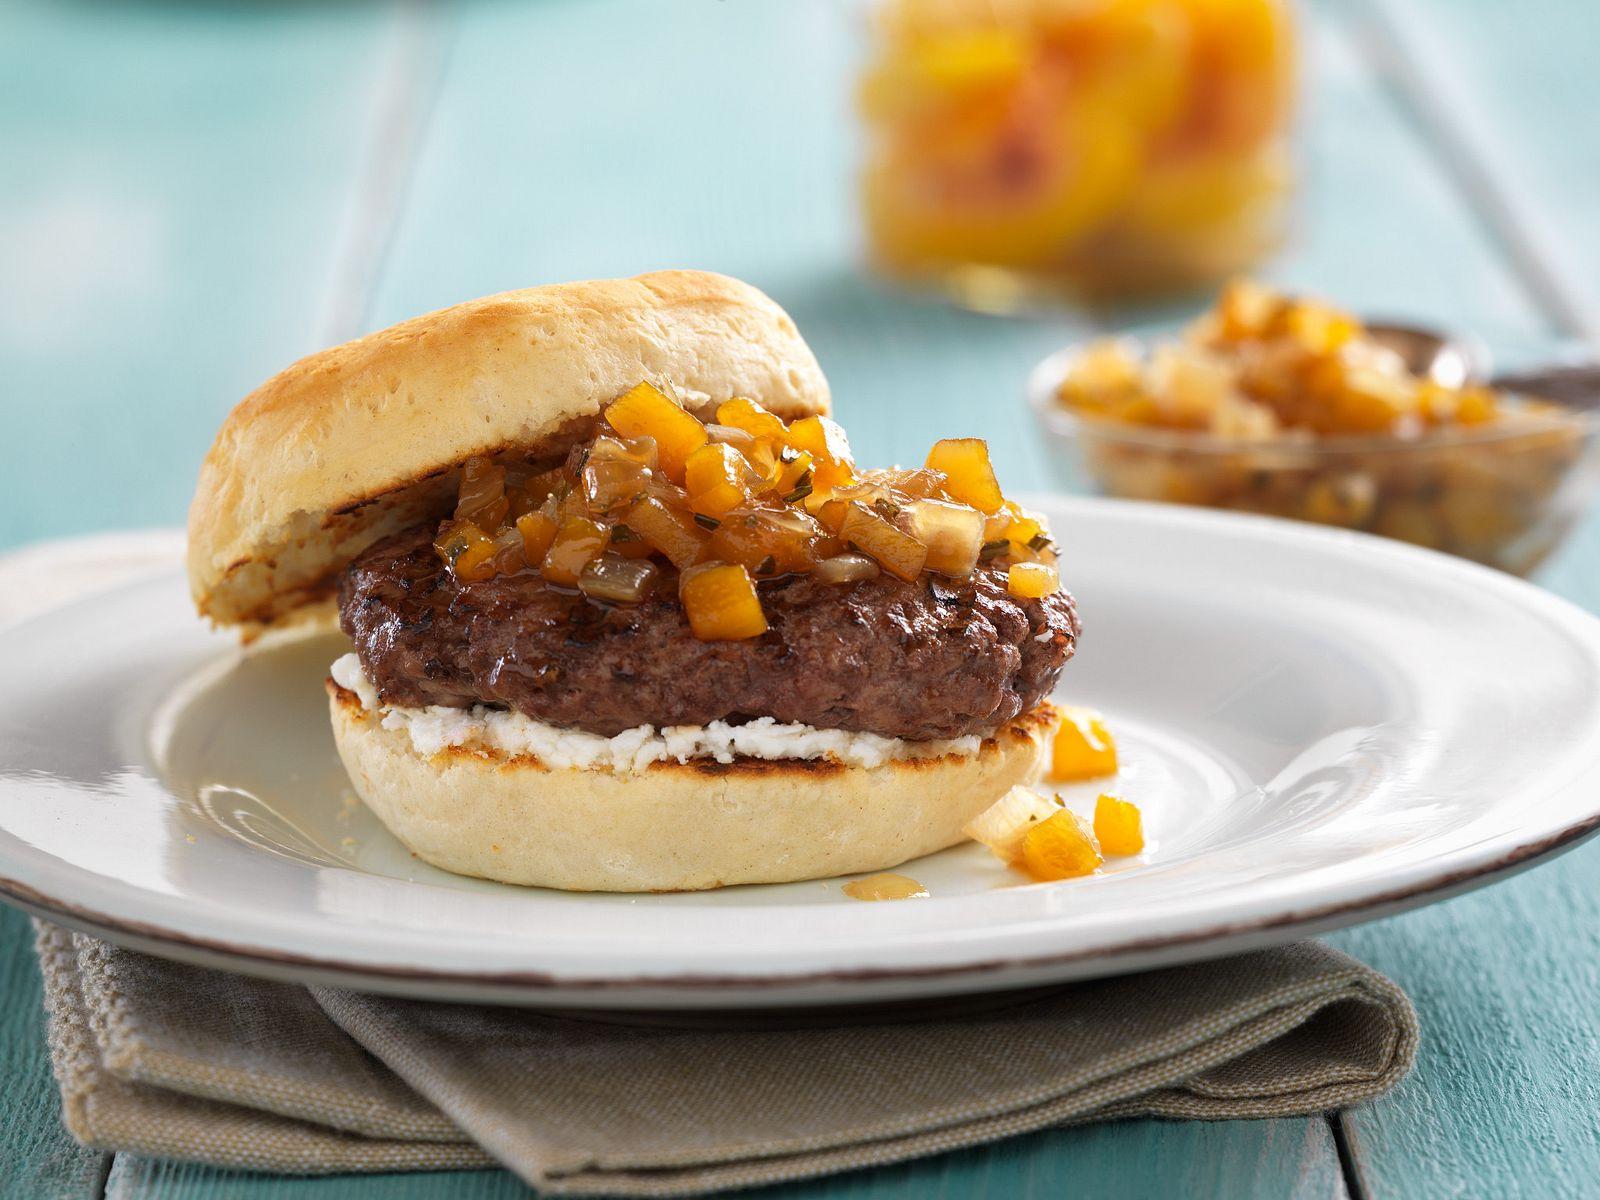 Old South Burgers with Peach Compote